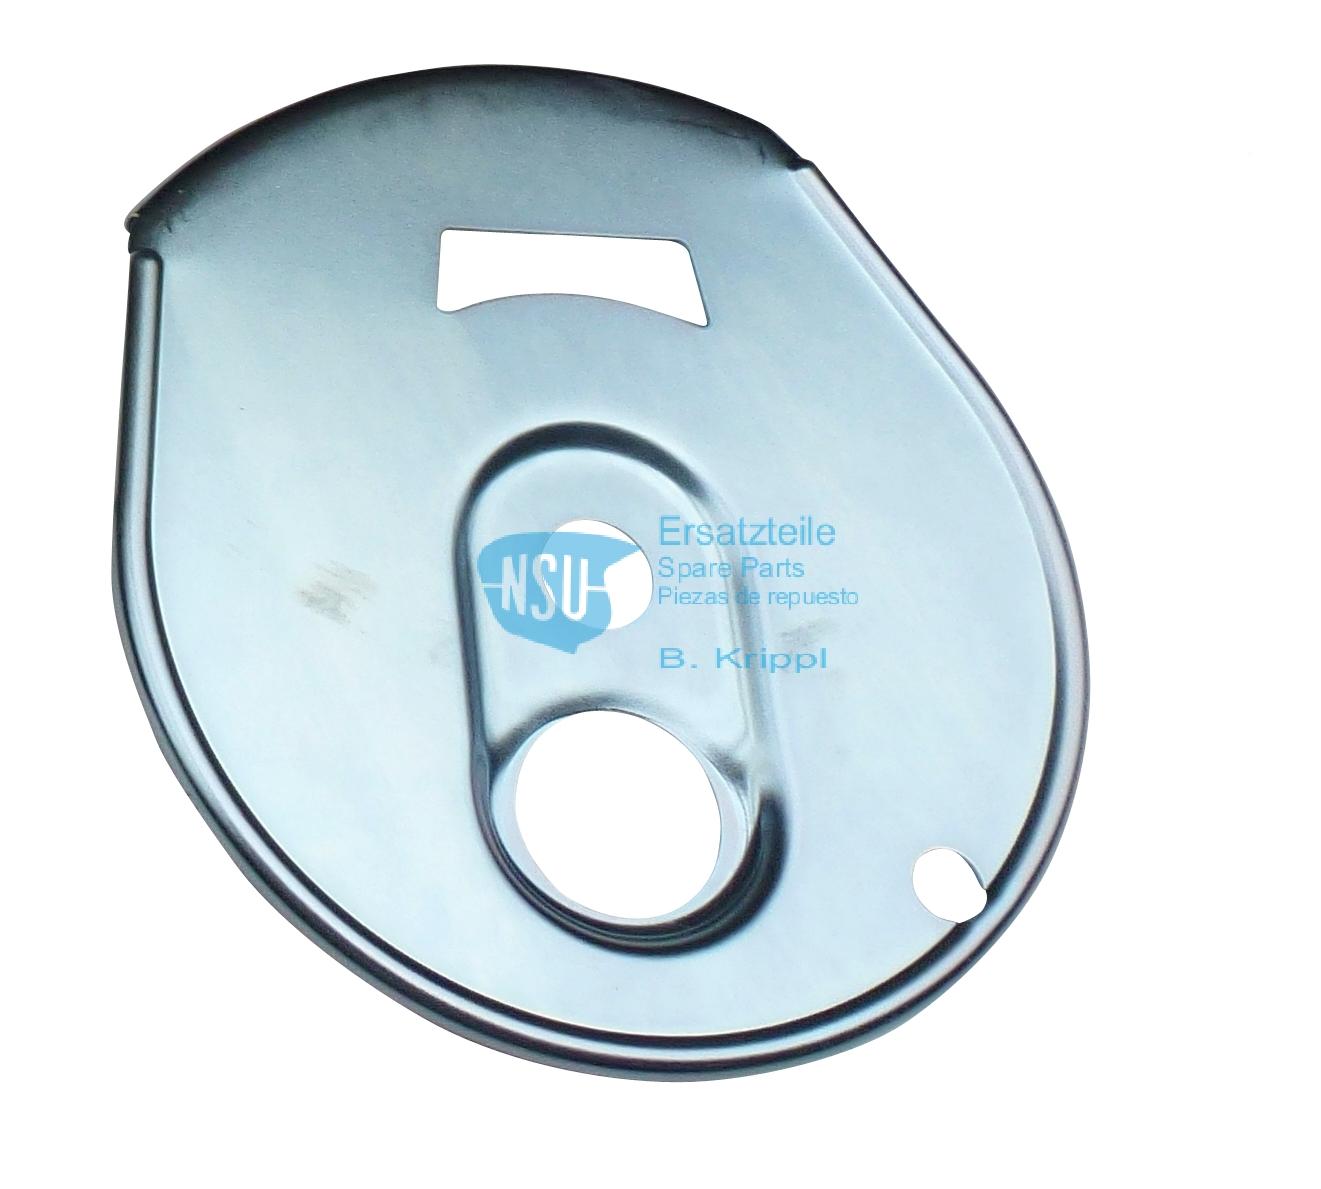 Cover plate for rear wheel